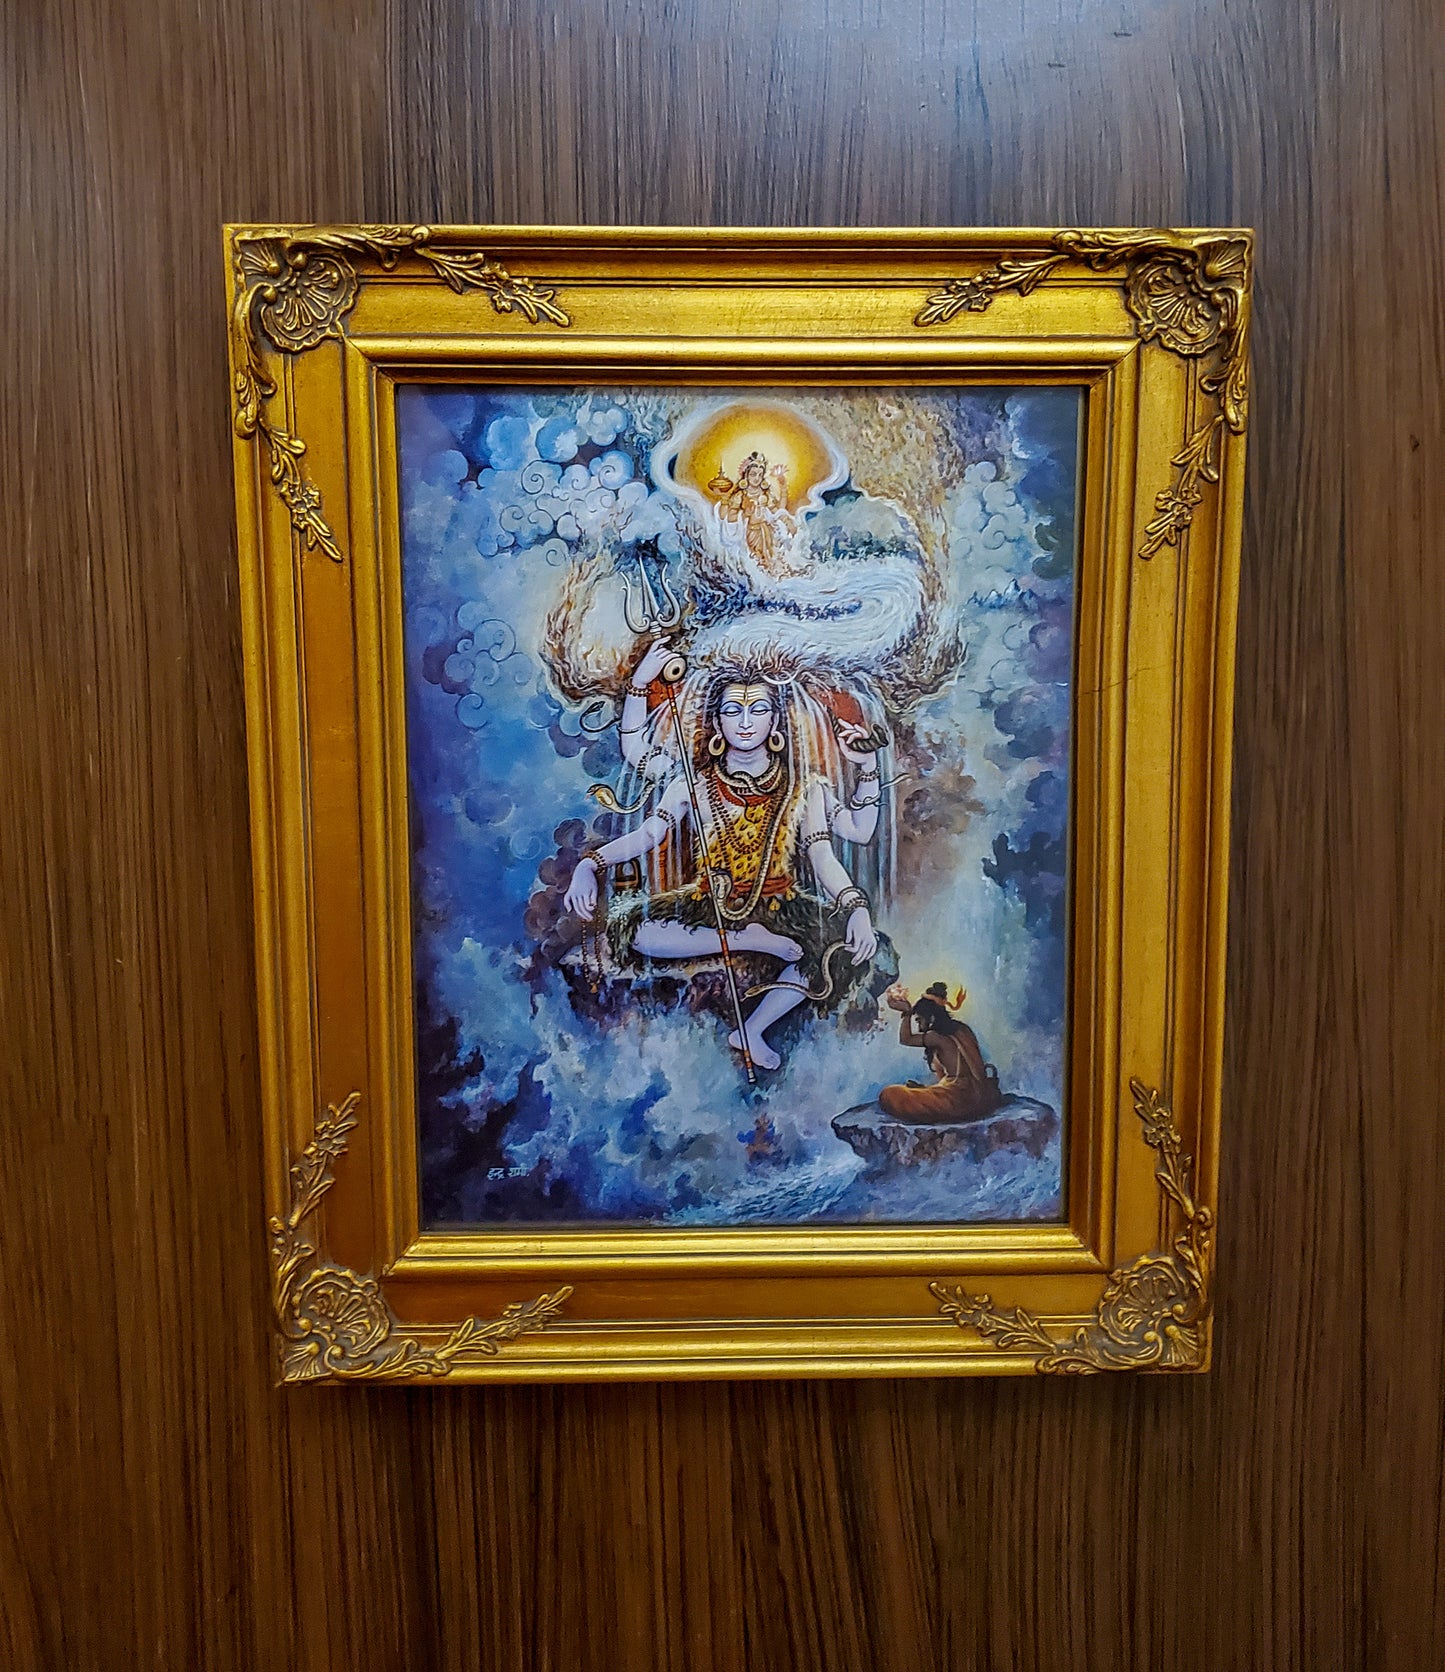 Shiva Poster Painting in Ornate Baroque Rococo Golden Frame - India Wall Decor